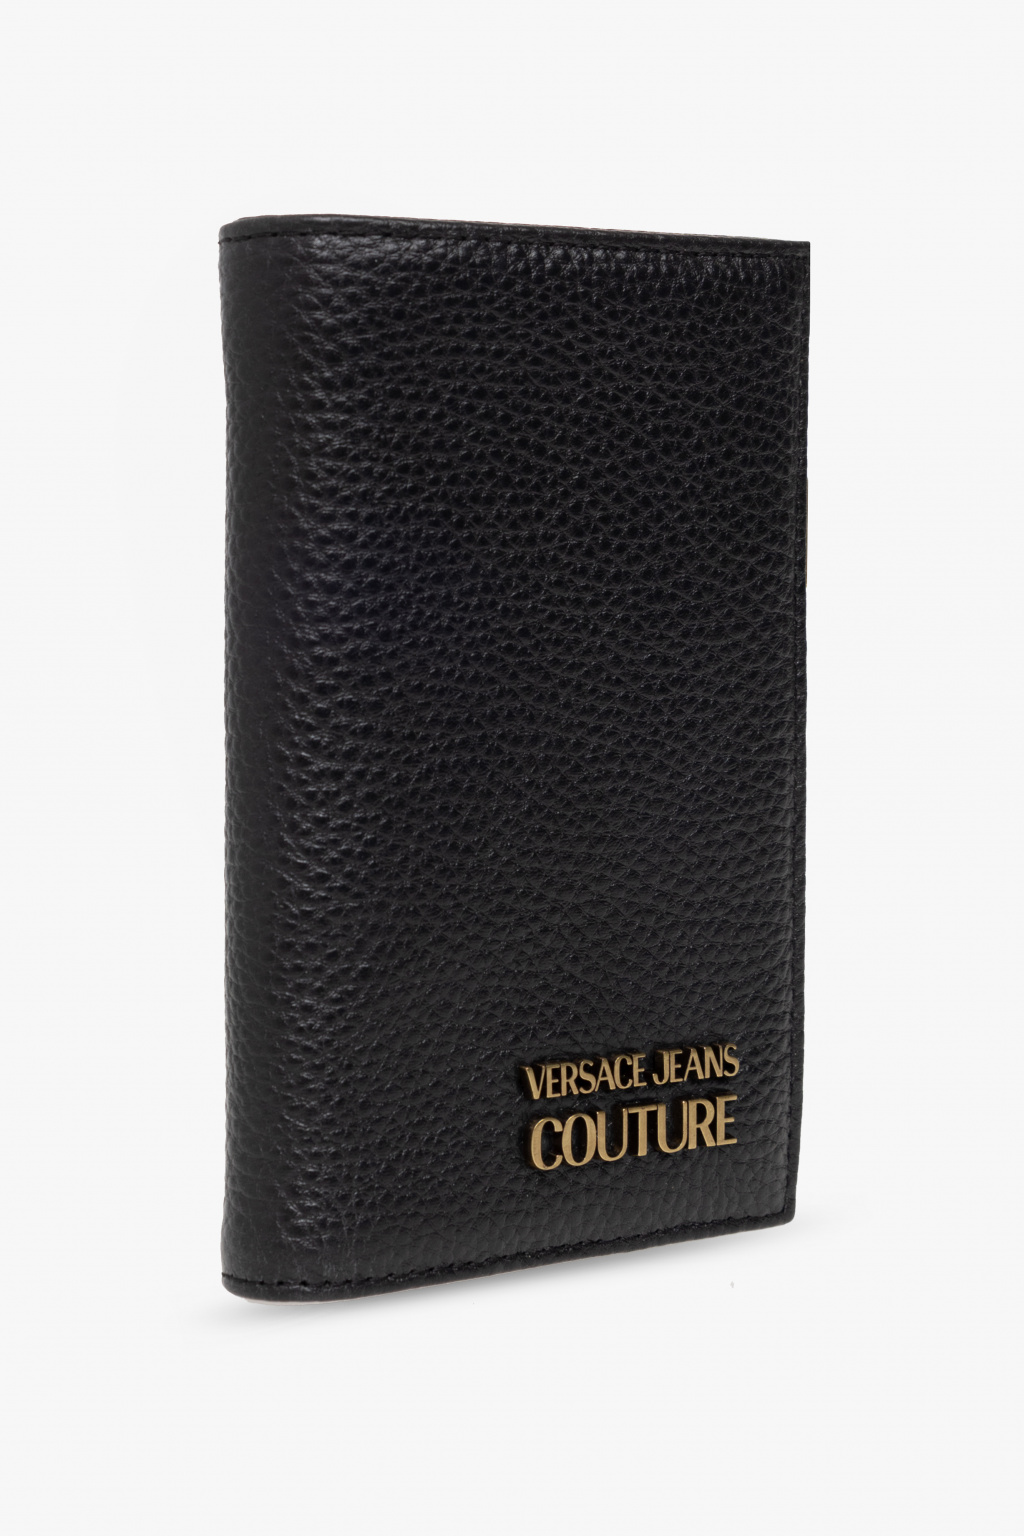 Versace feather-trim jeans Couture Wallet with logo